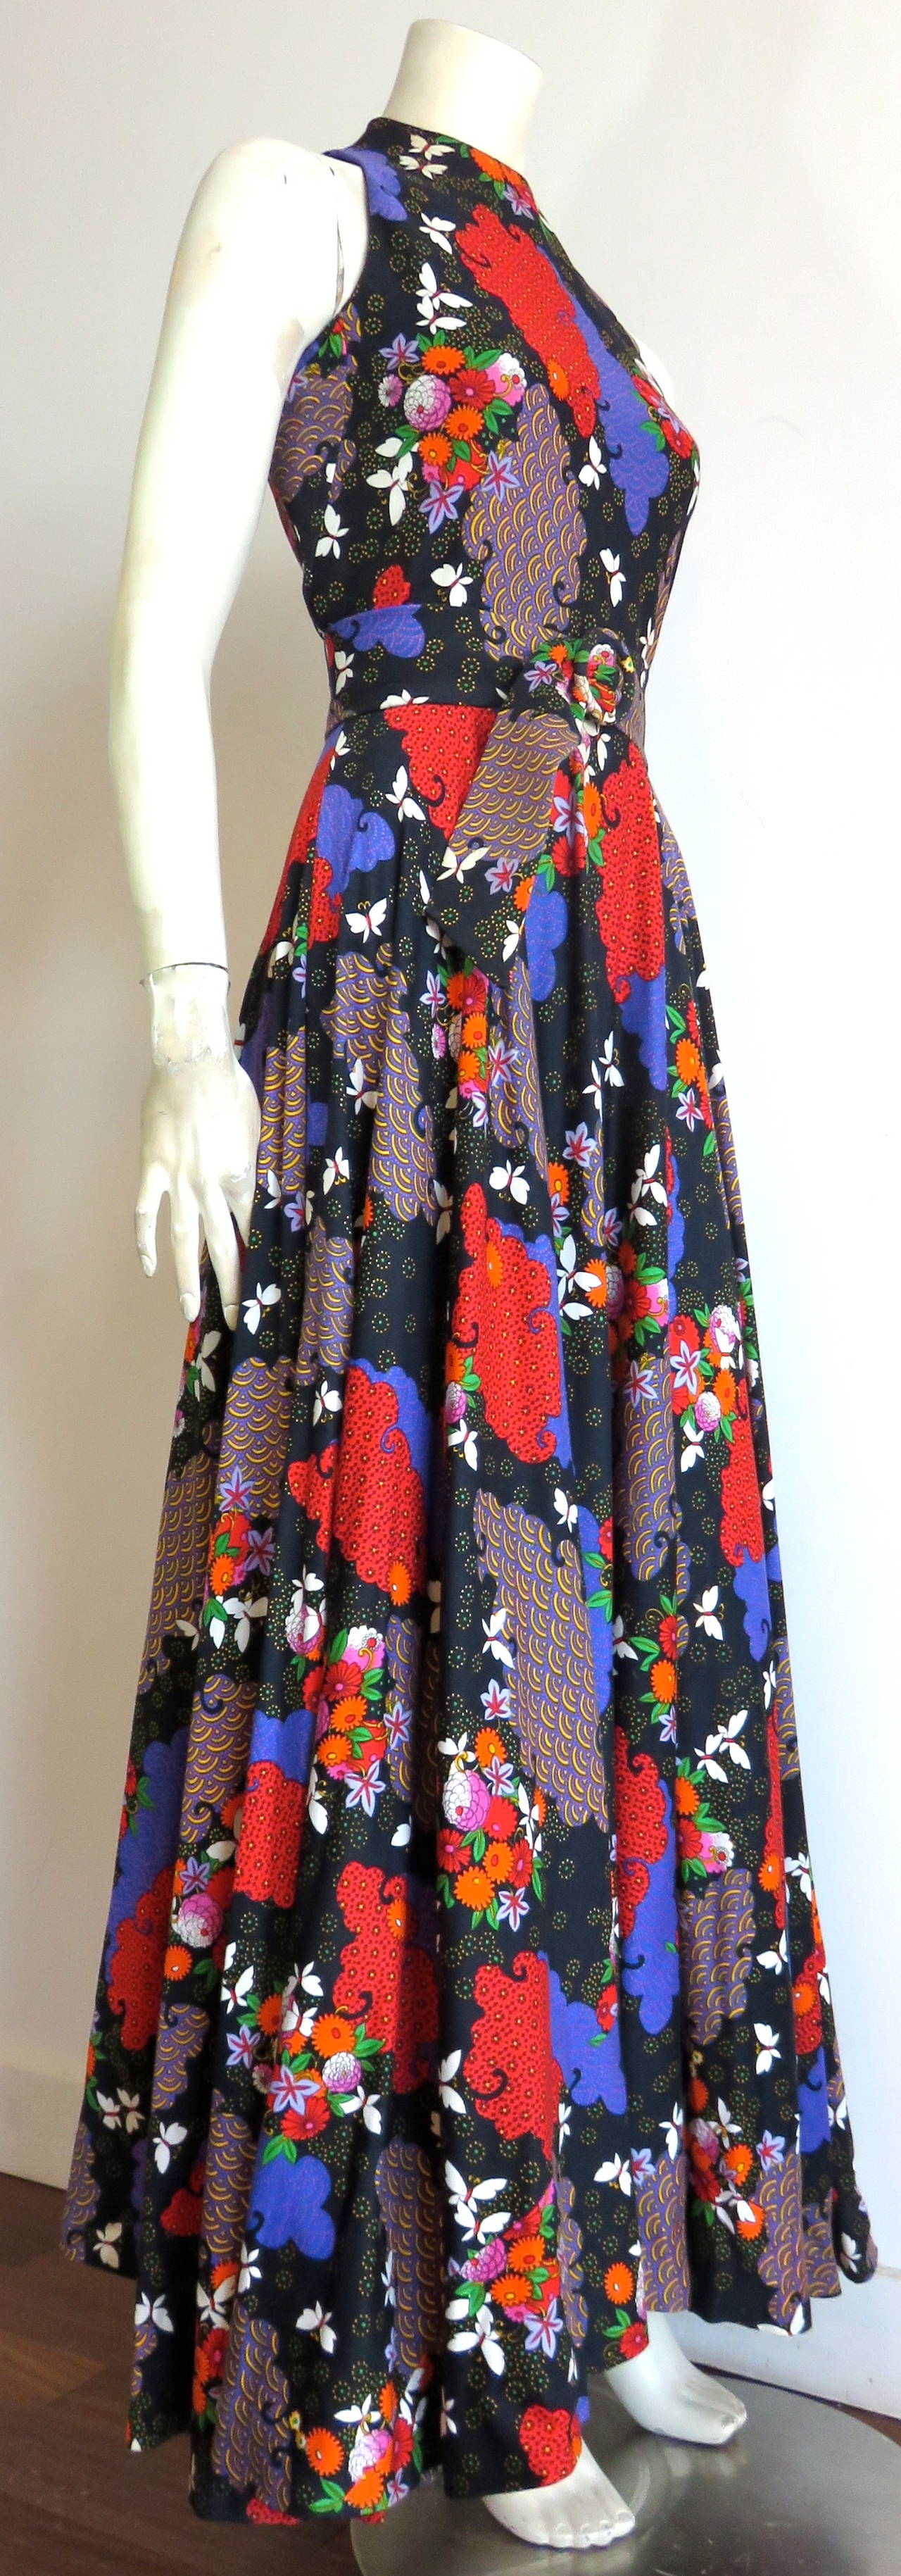 1970's GEOFFREY BEENE BOUTIQUE Floral print dress & belt In Excellent Condition For Sale In Newport Beach, CA